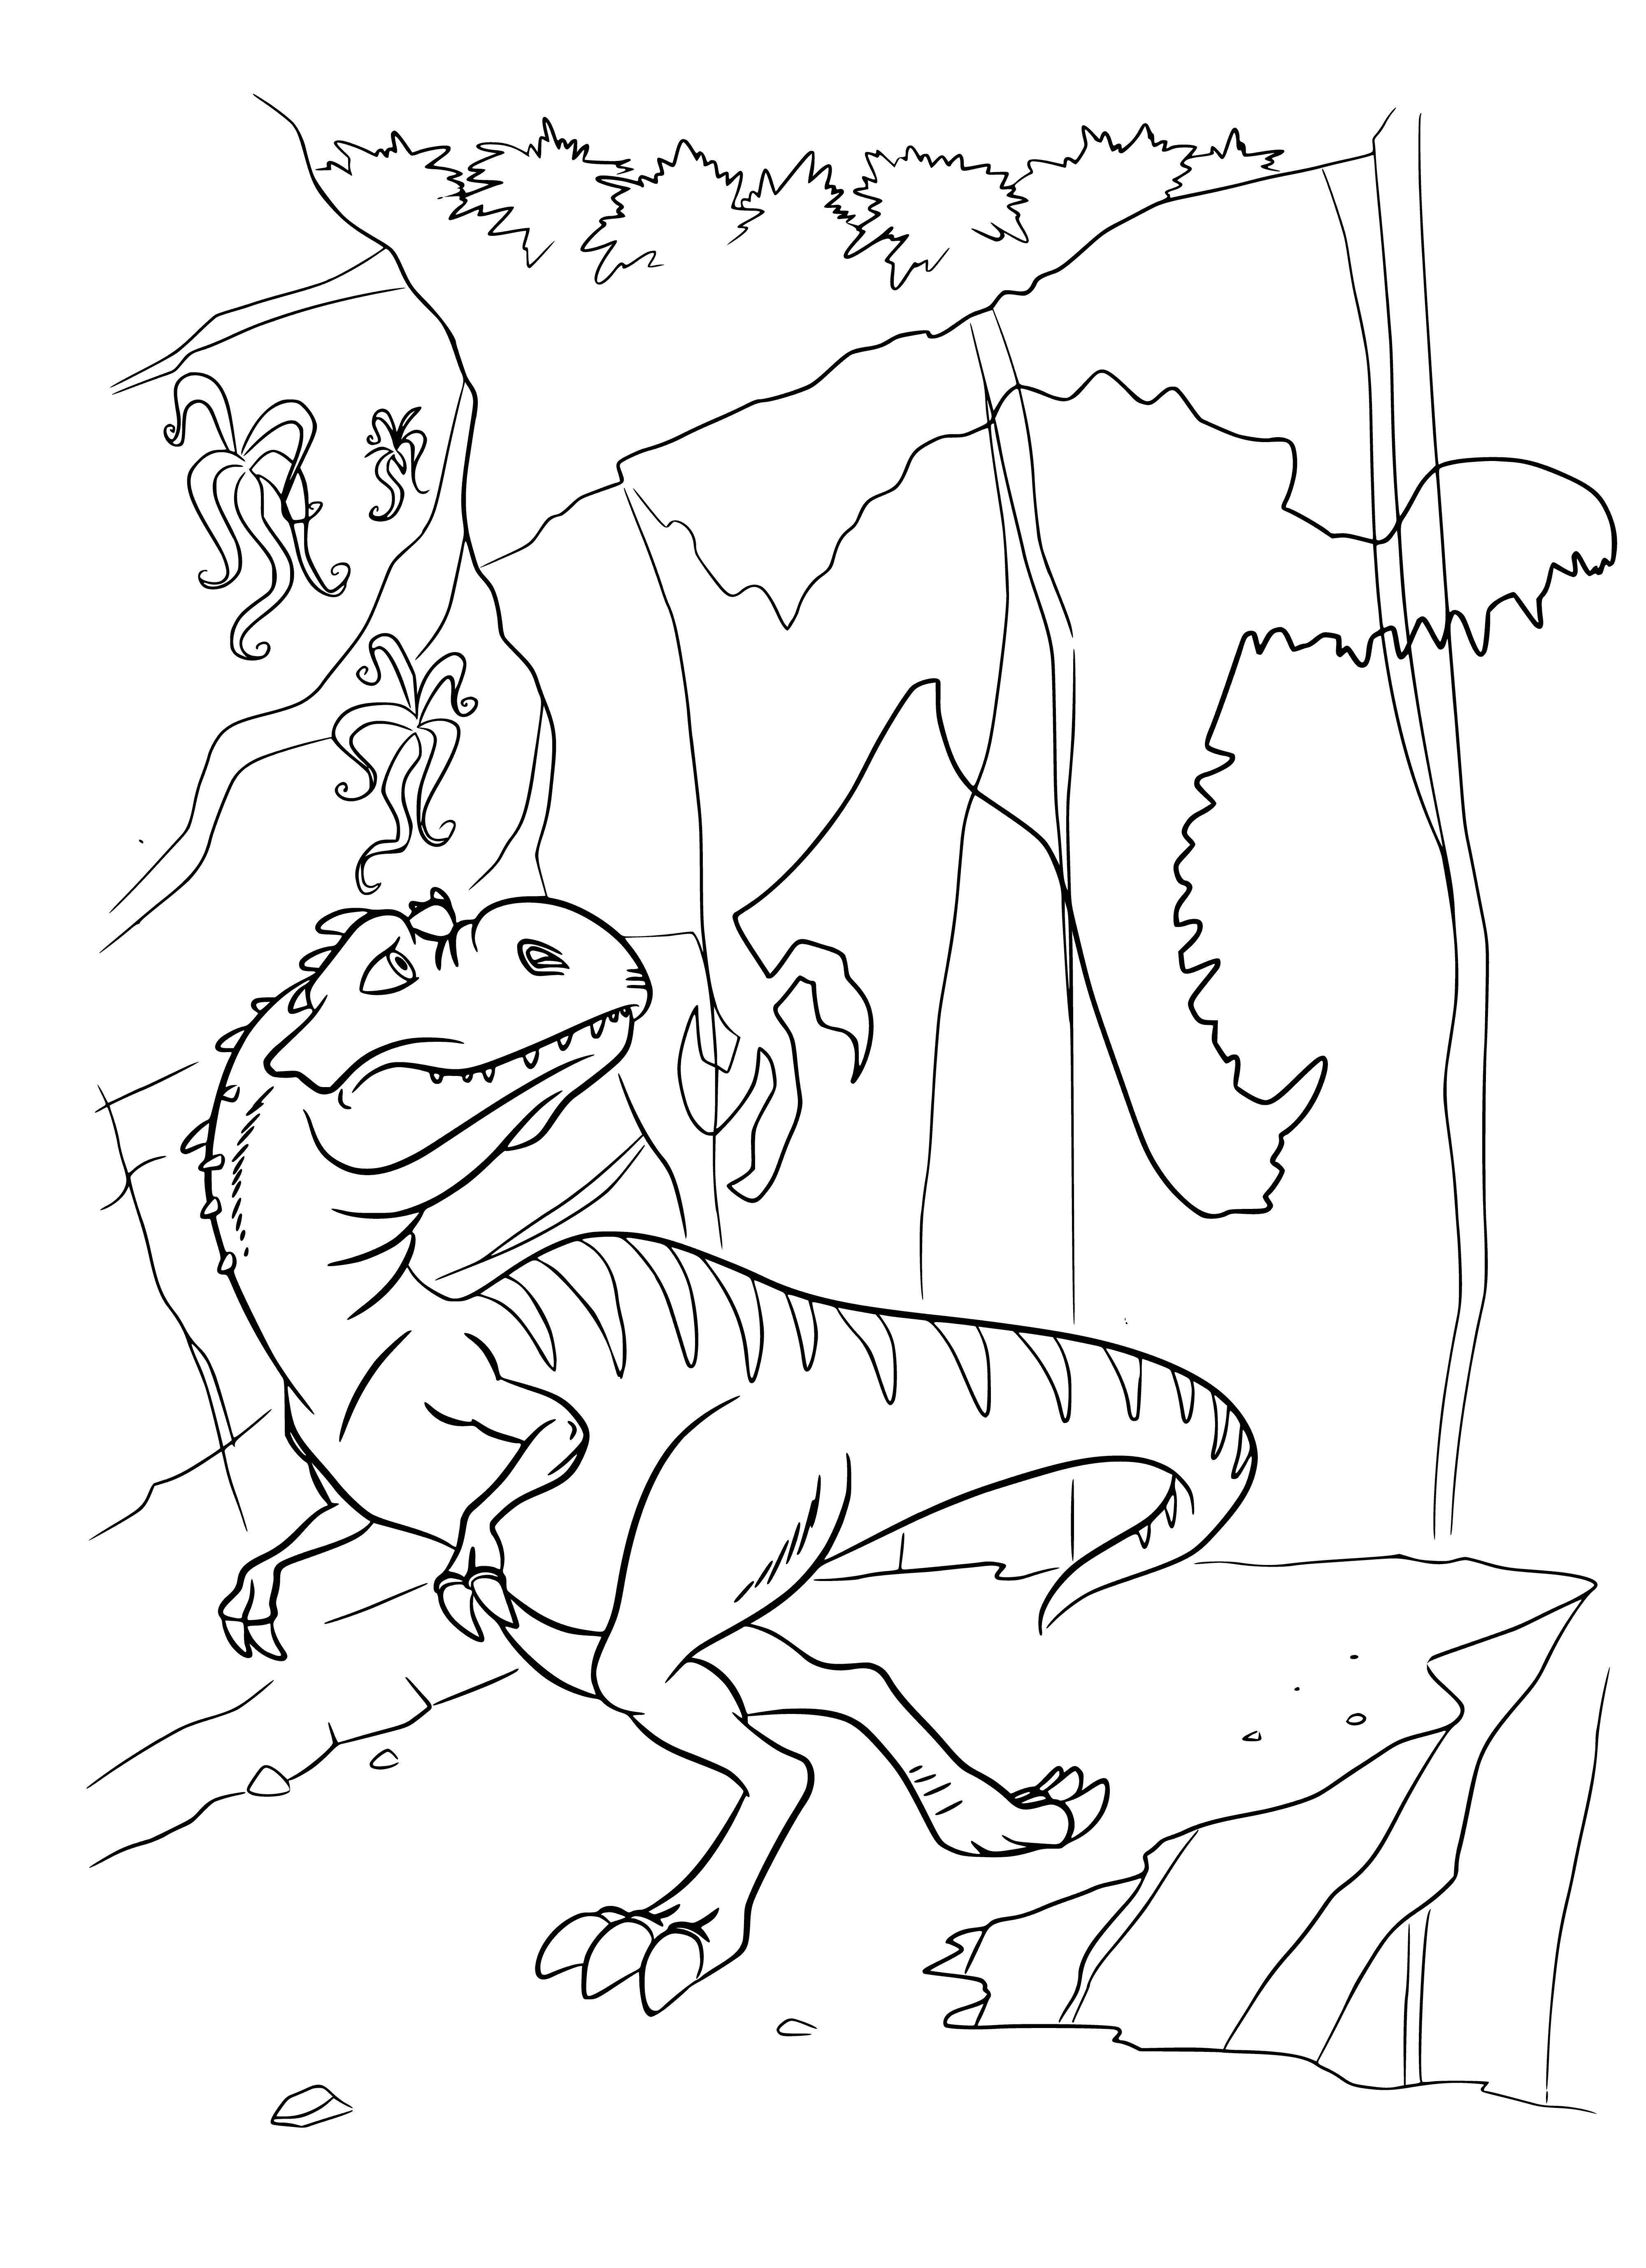 coloring page: Dinosaurs standing on a large icy ocean with a blue sky & clouds. Big dino has long neck, sharp teeth & yellow eyes; small dino has sharp teeth.